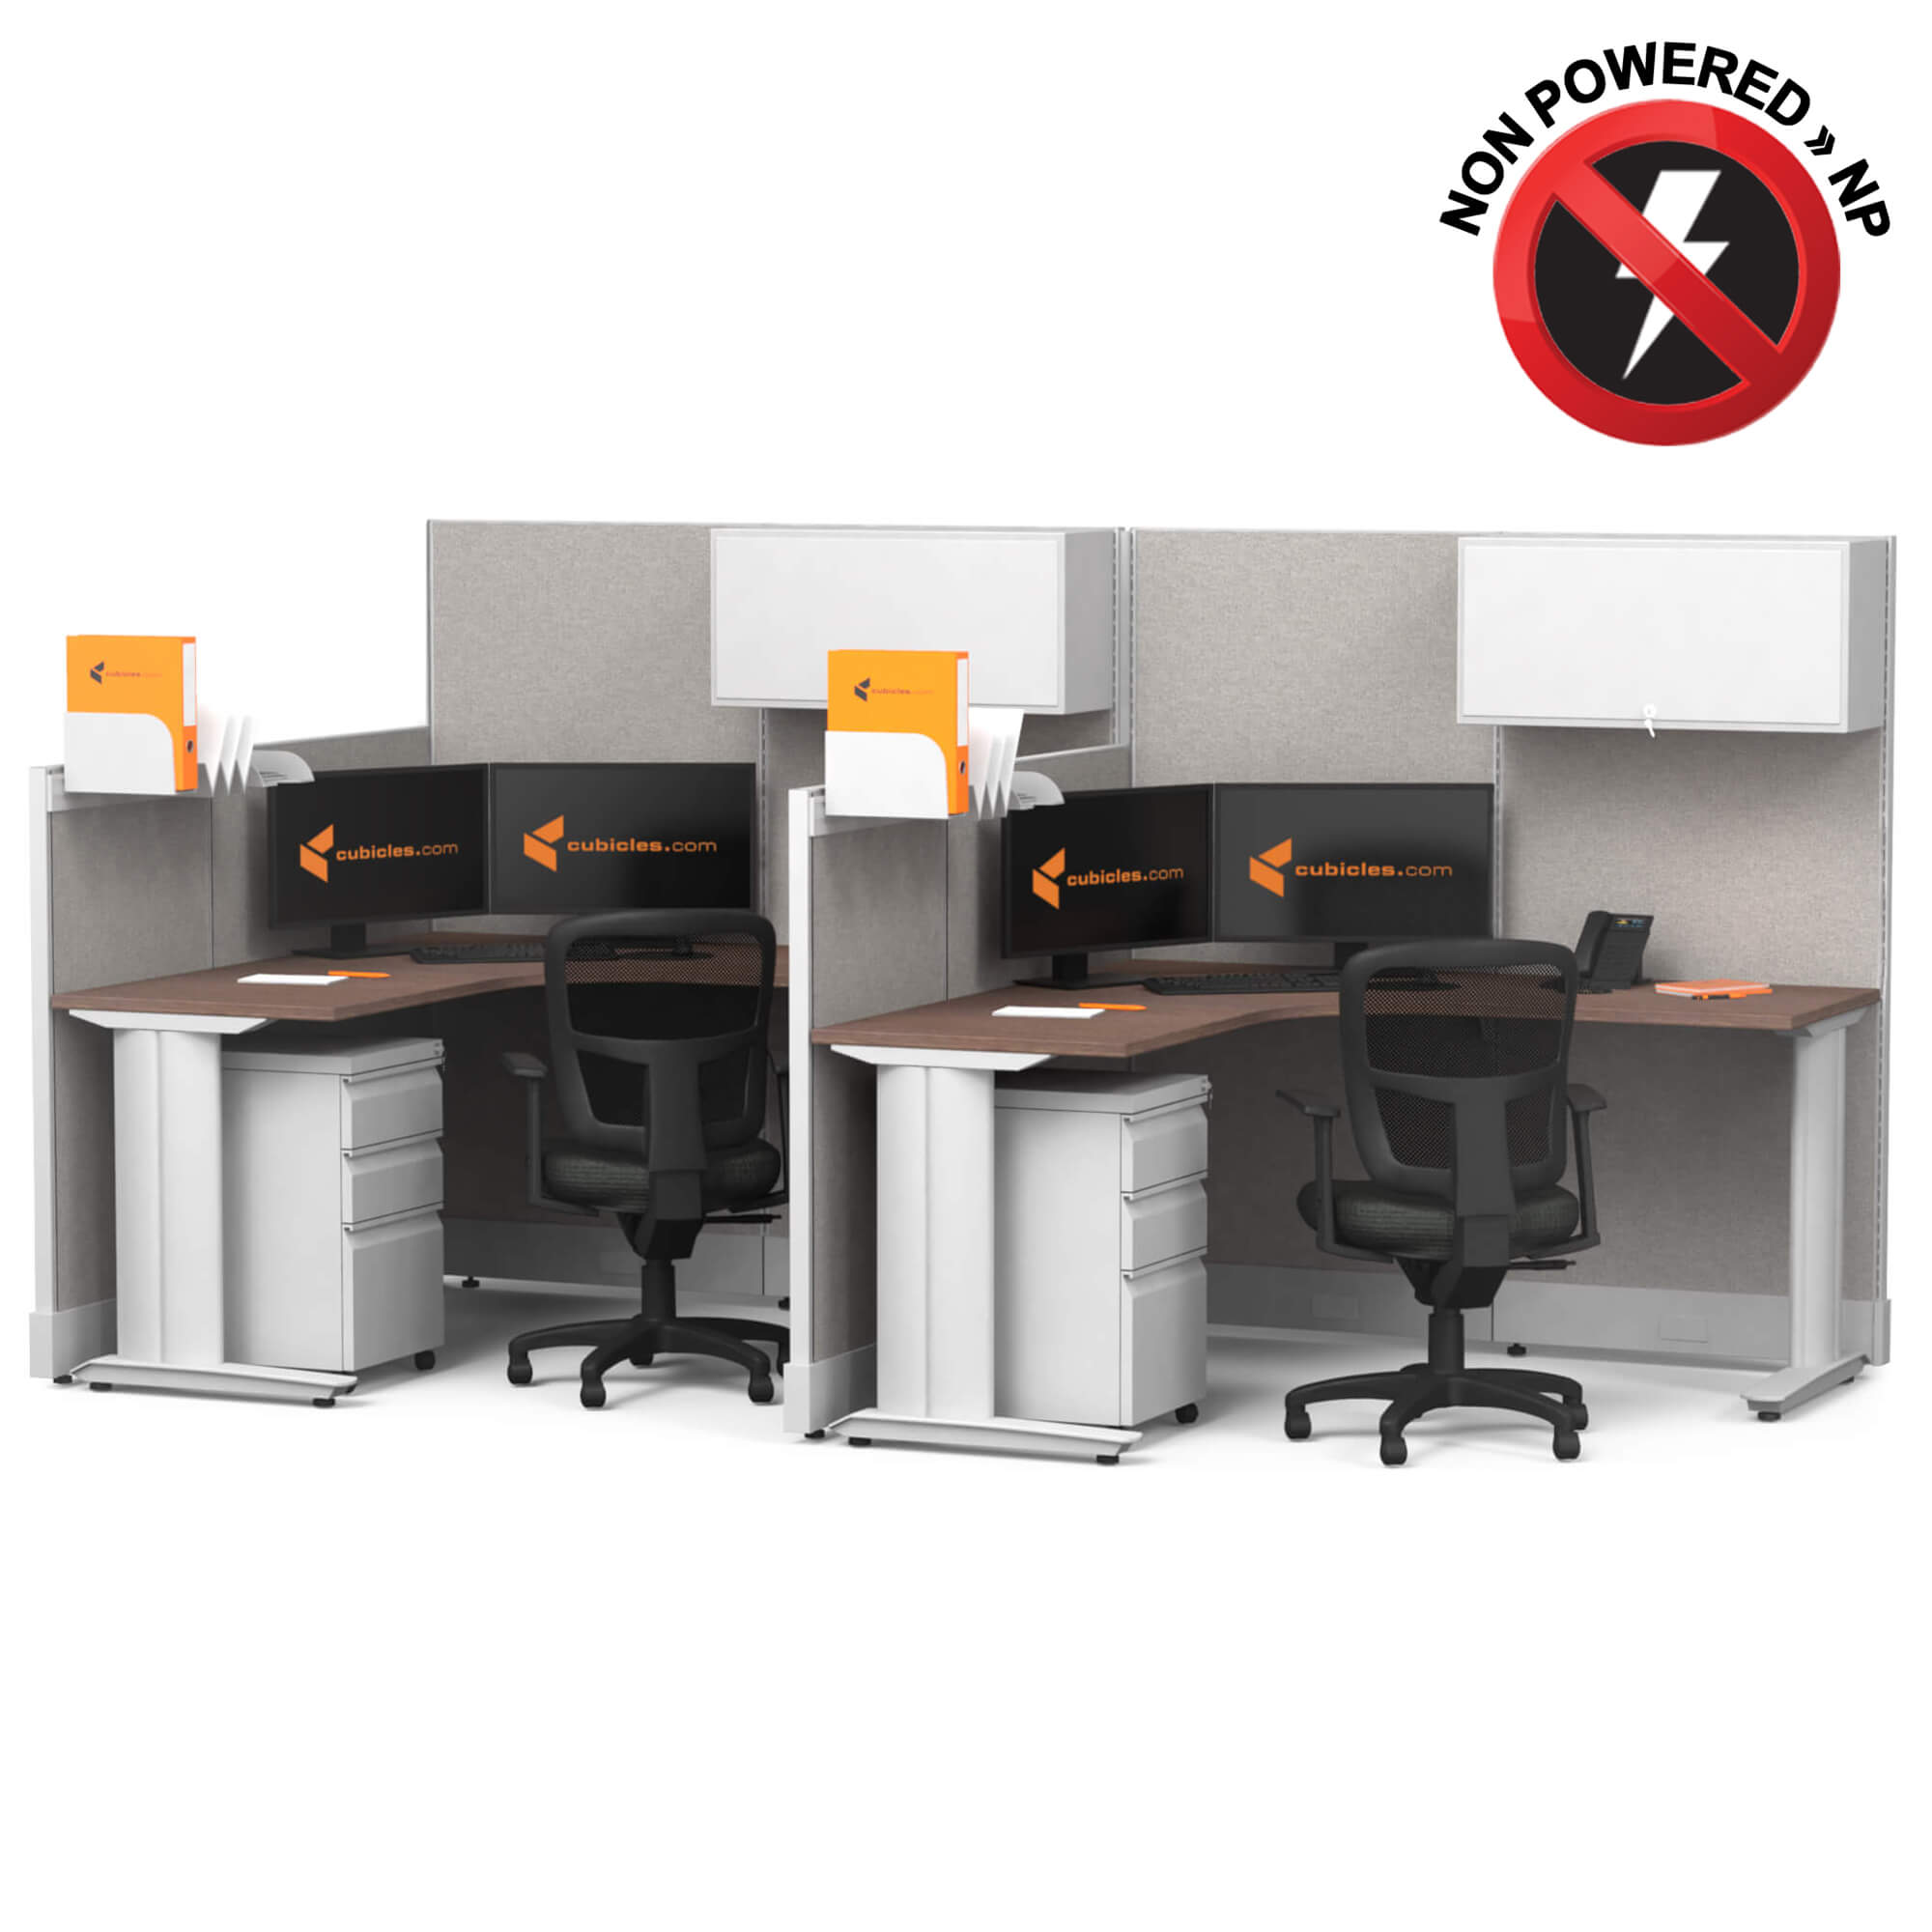 cubicle-desk-l-shaped-workstation-2pack-inline-non-powered-with-storage-sign.jpg